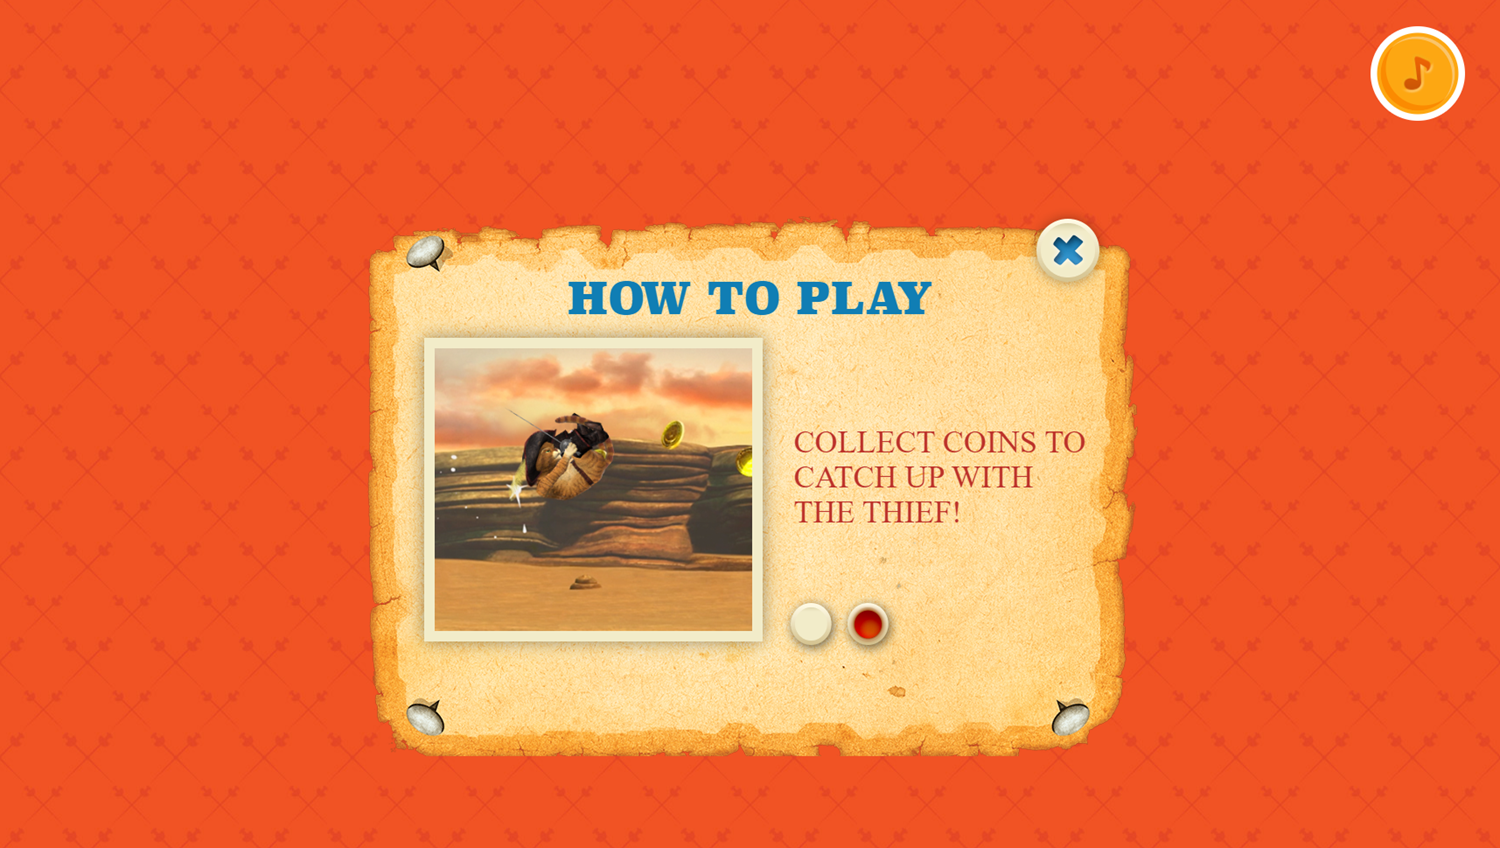 The Adventures of Puss in Boots Catch the Thief Game Instructions Screenshot.